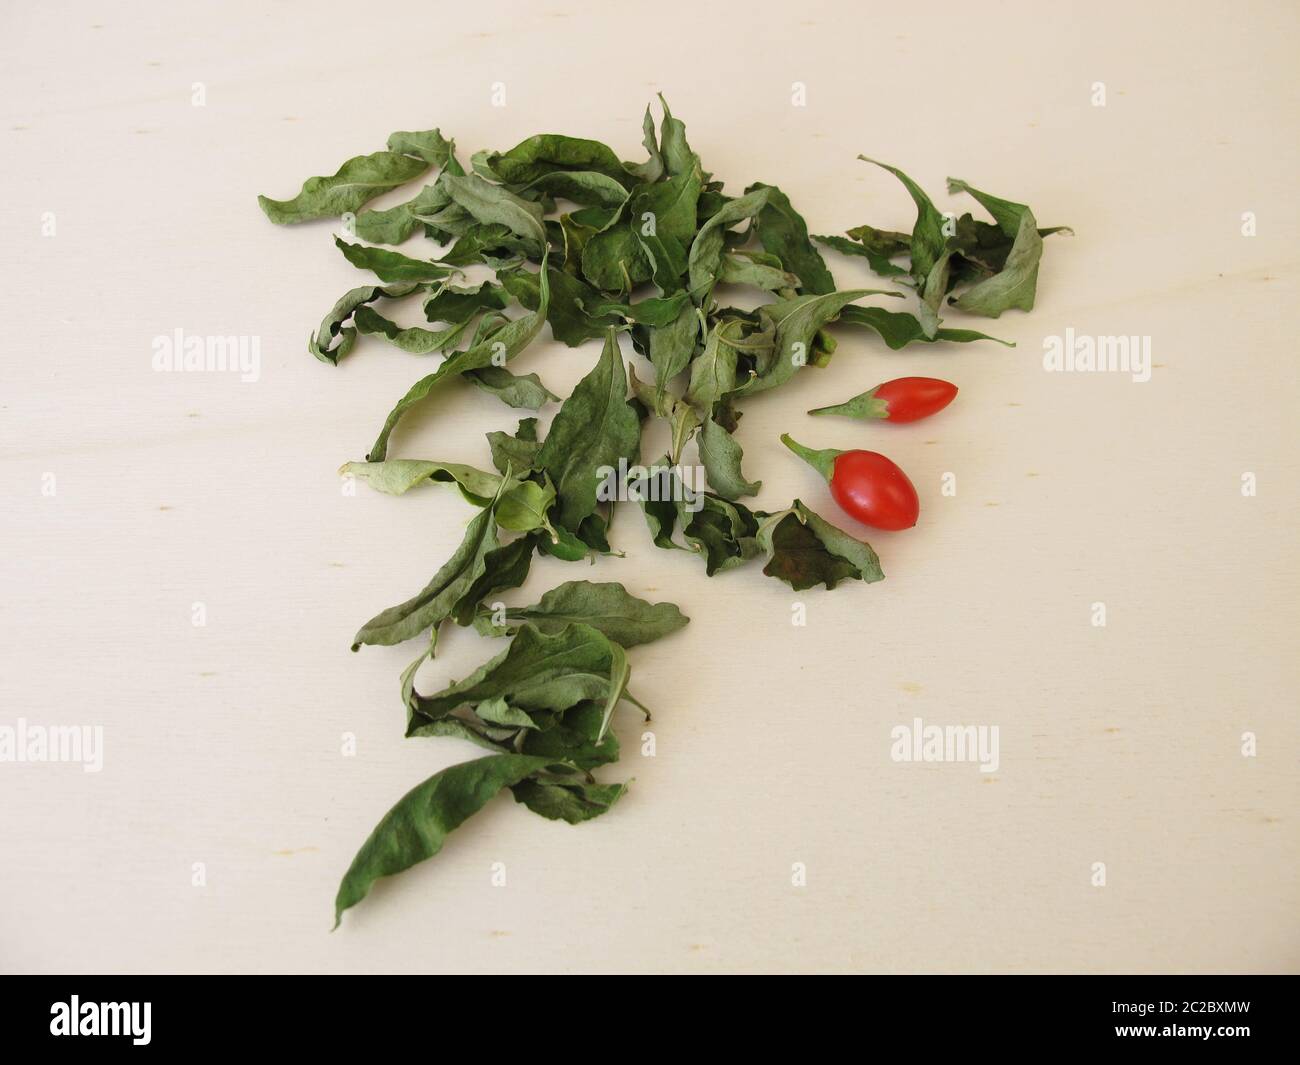 Dried goji leaves on a wooden board Stock Photo